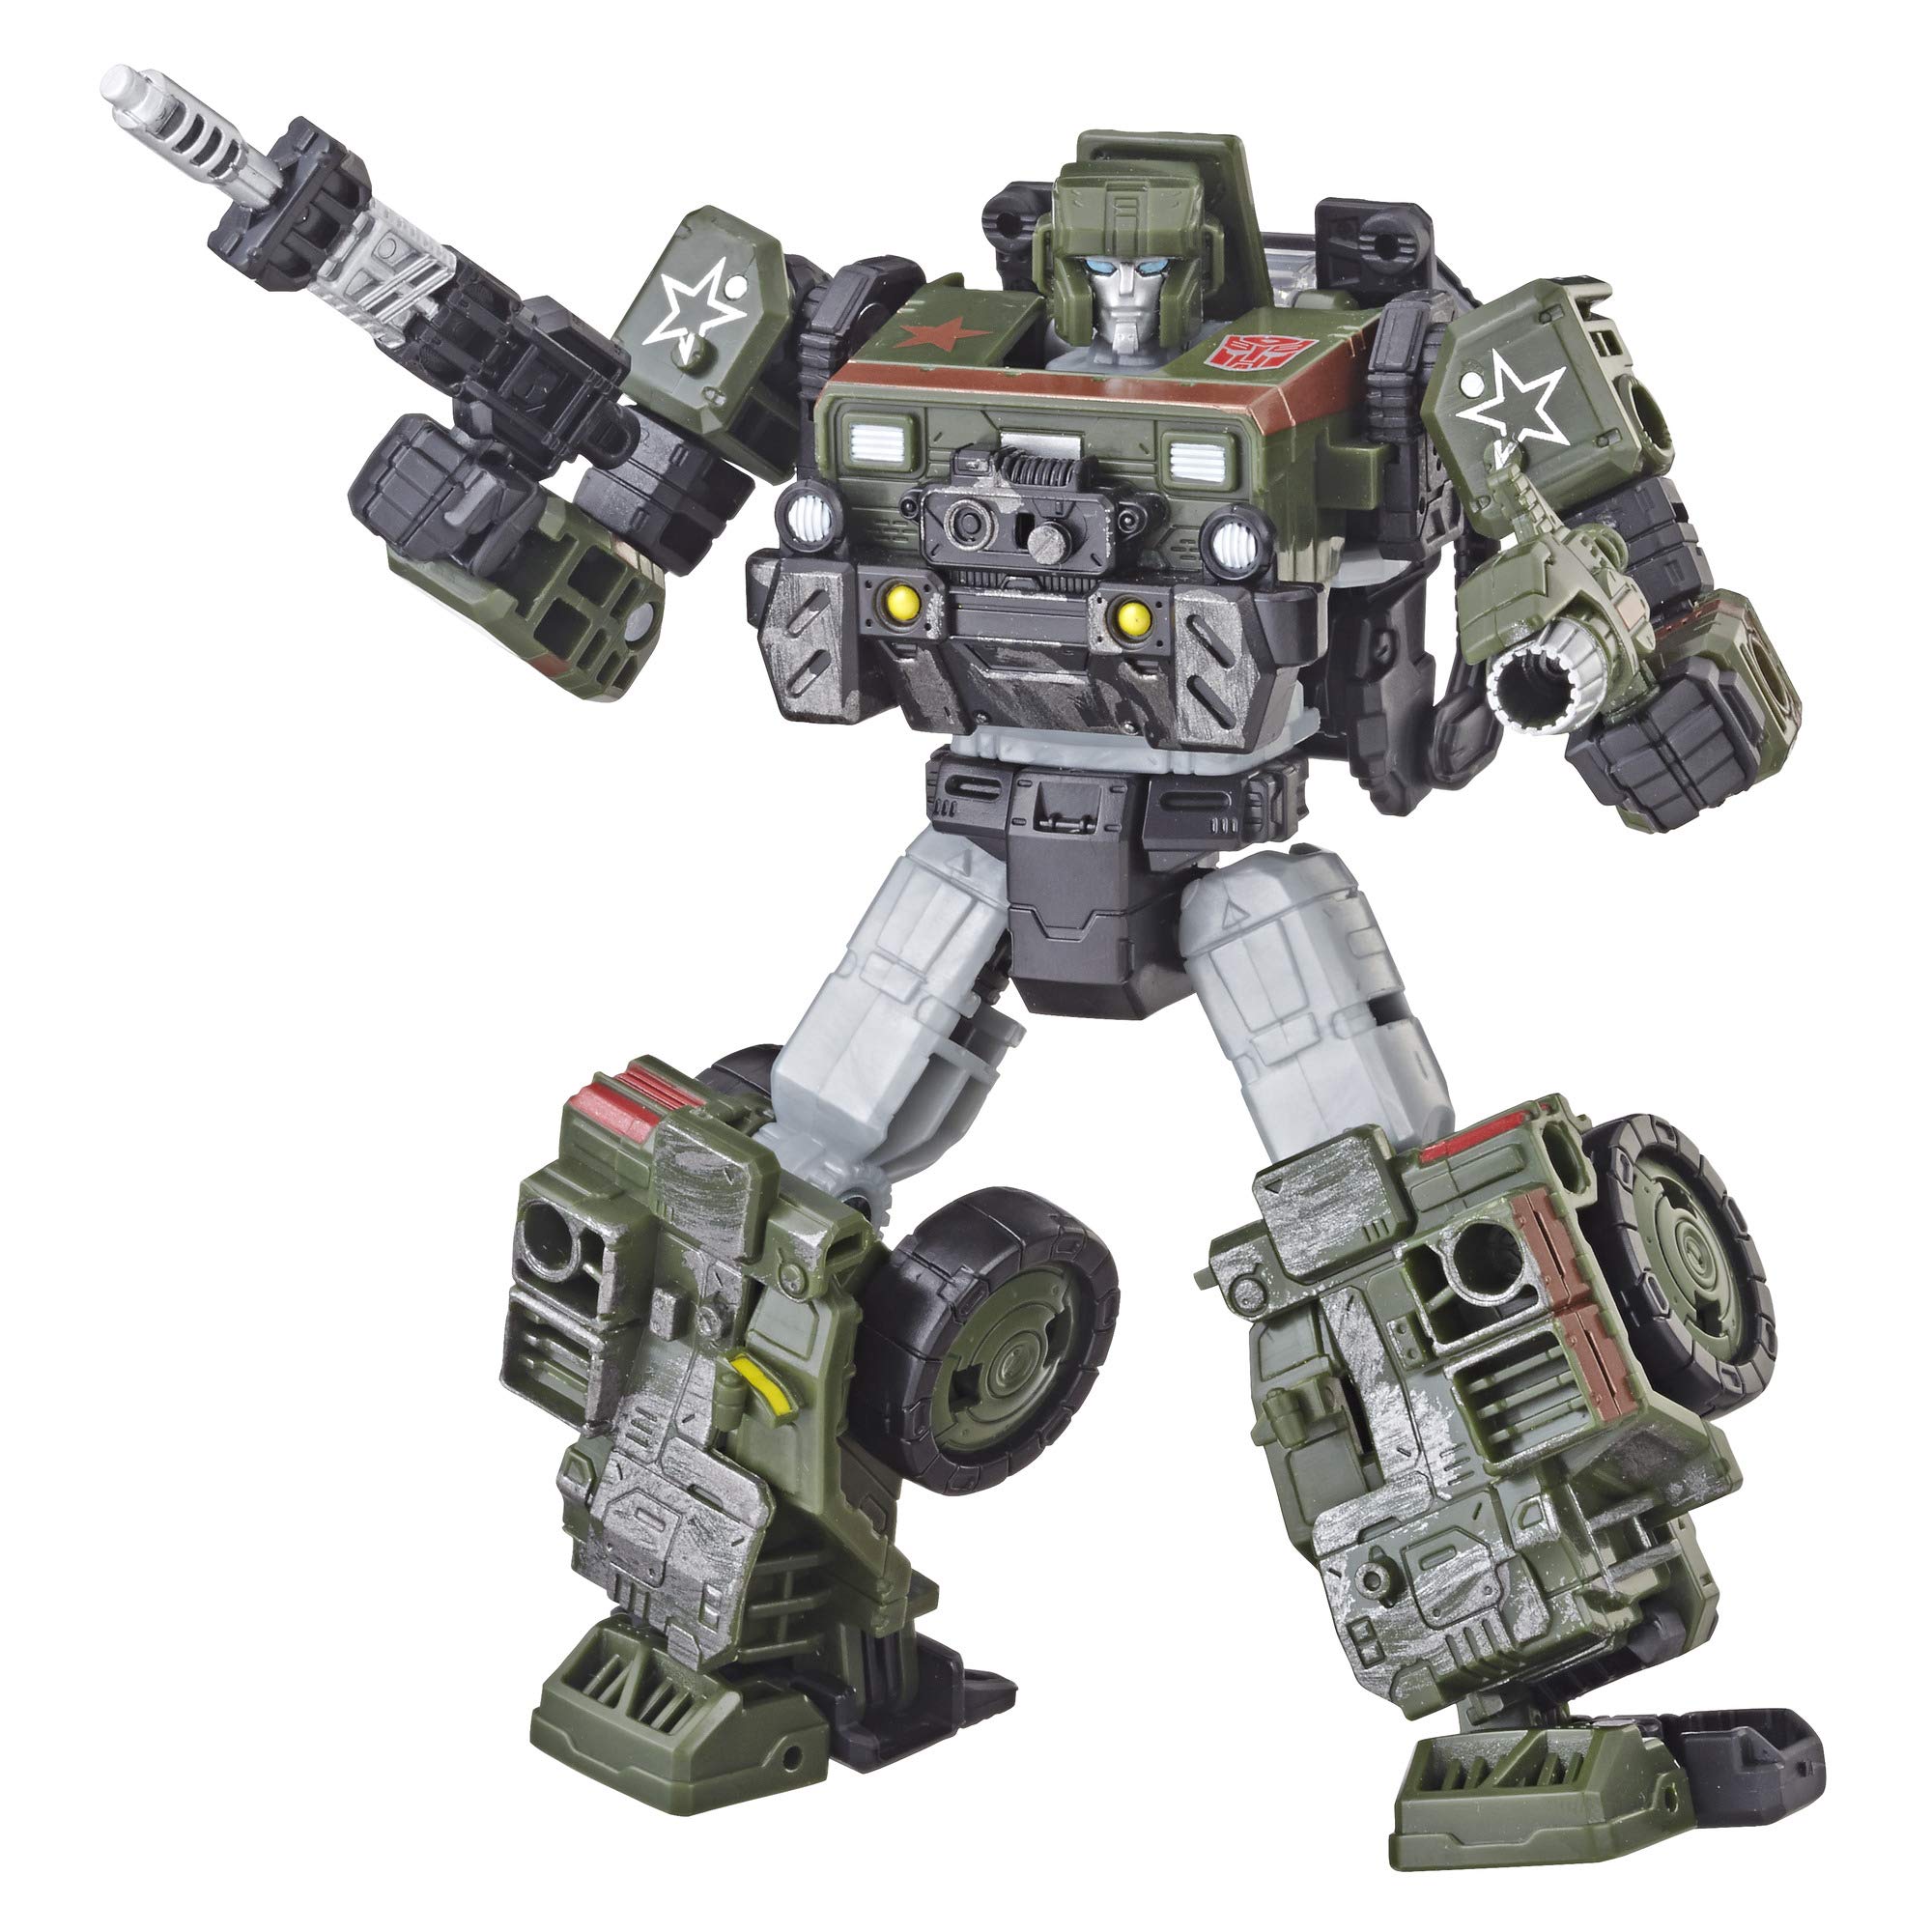 Hasbro - Transformers - Generations War For Cybertron Deluxe WFC-S37 Autobot Hound E3537